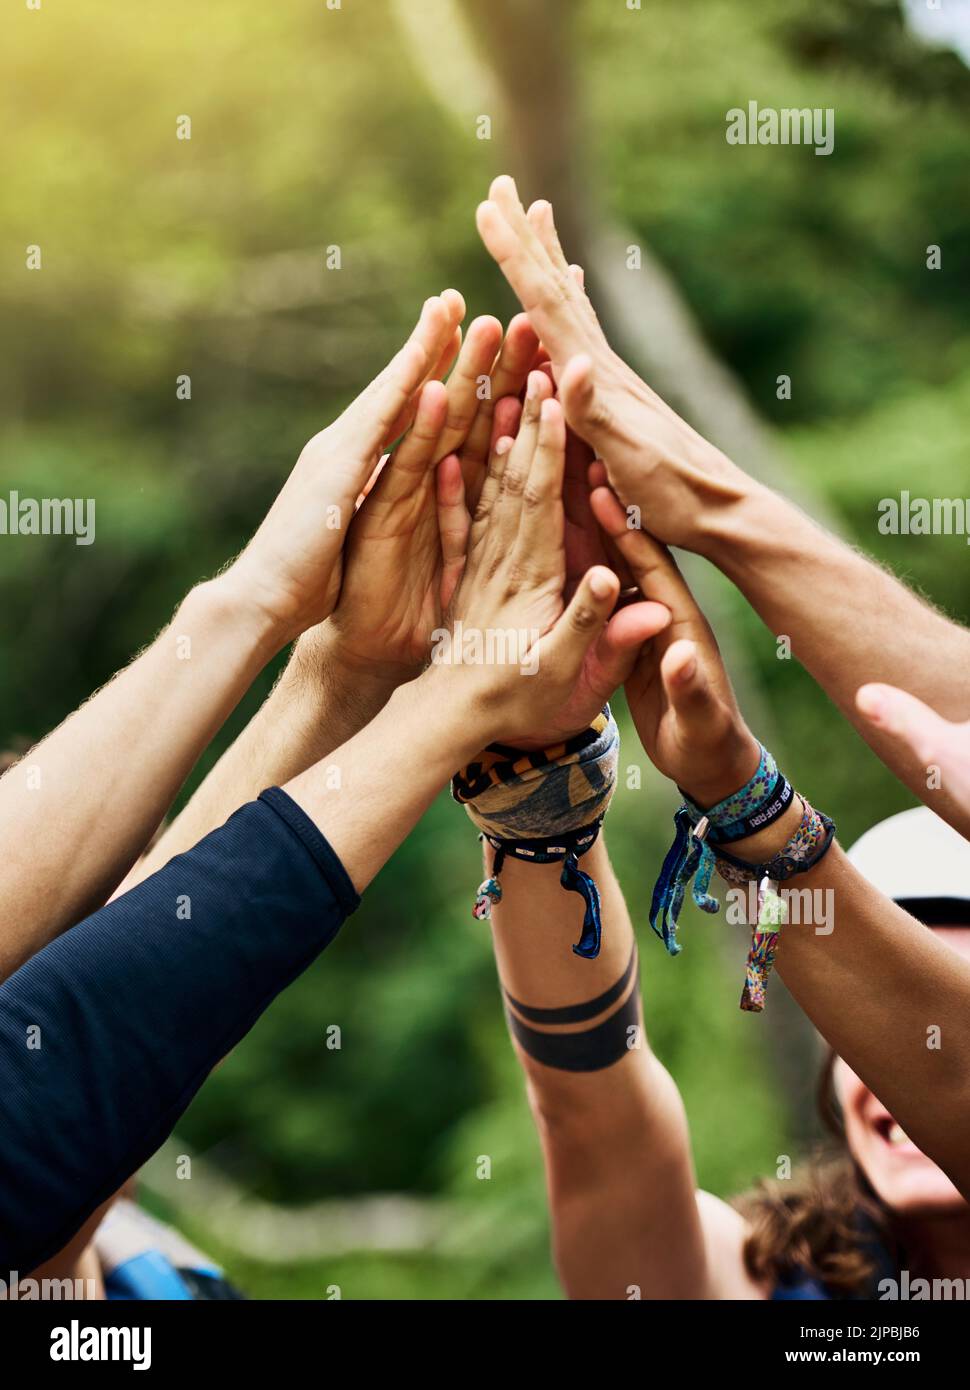 Lets go rafting. a group of unrecognizable peoples hands raised in the air to form a huddle together outside during the day. Stock Photo